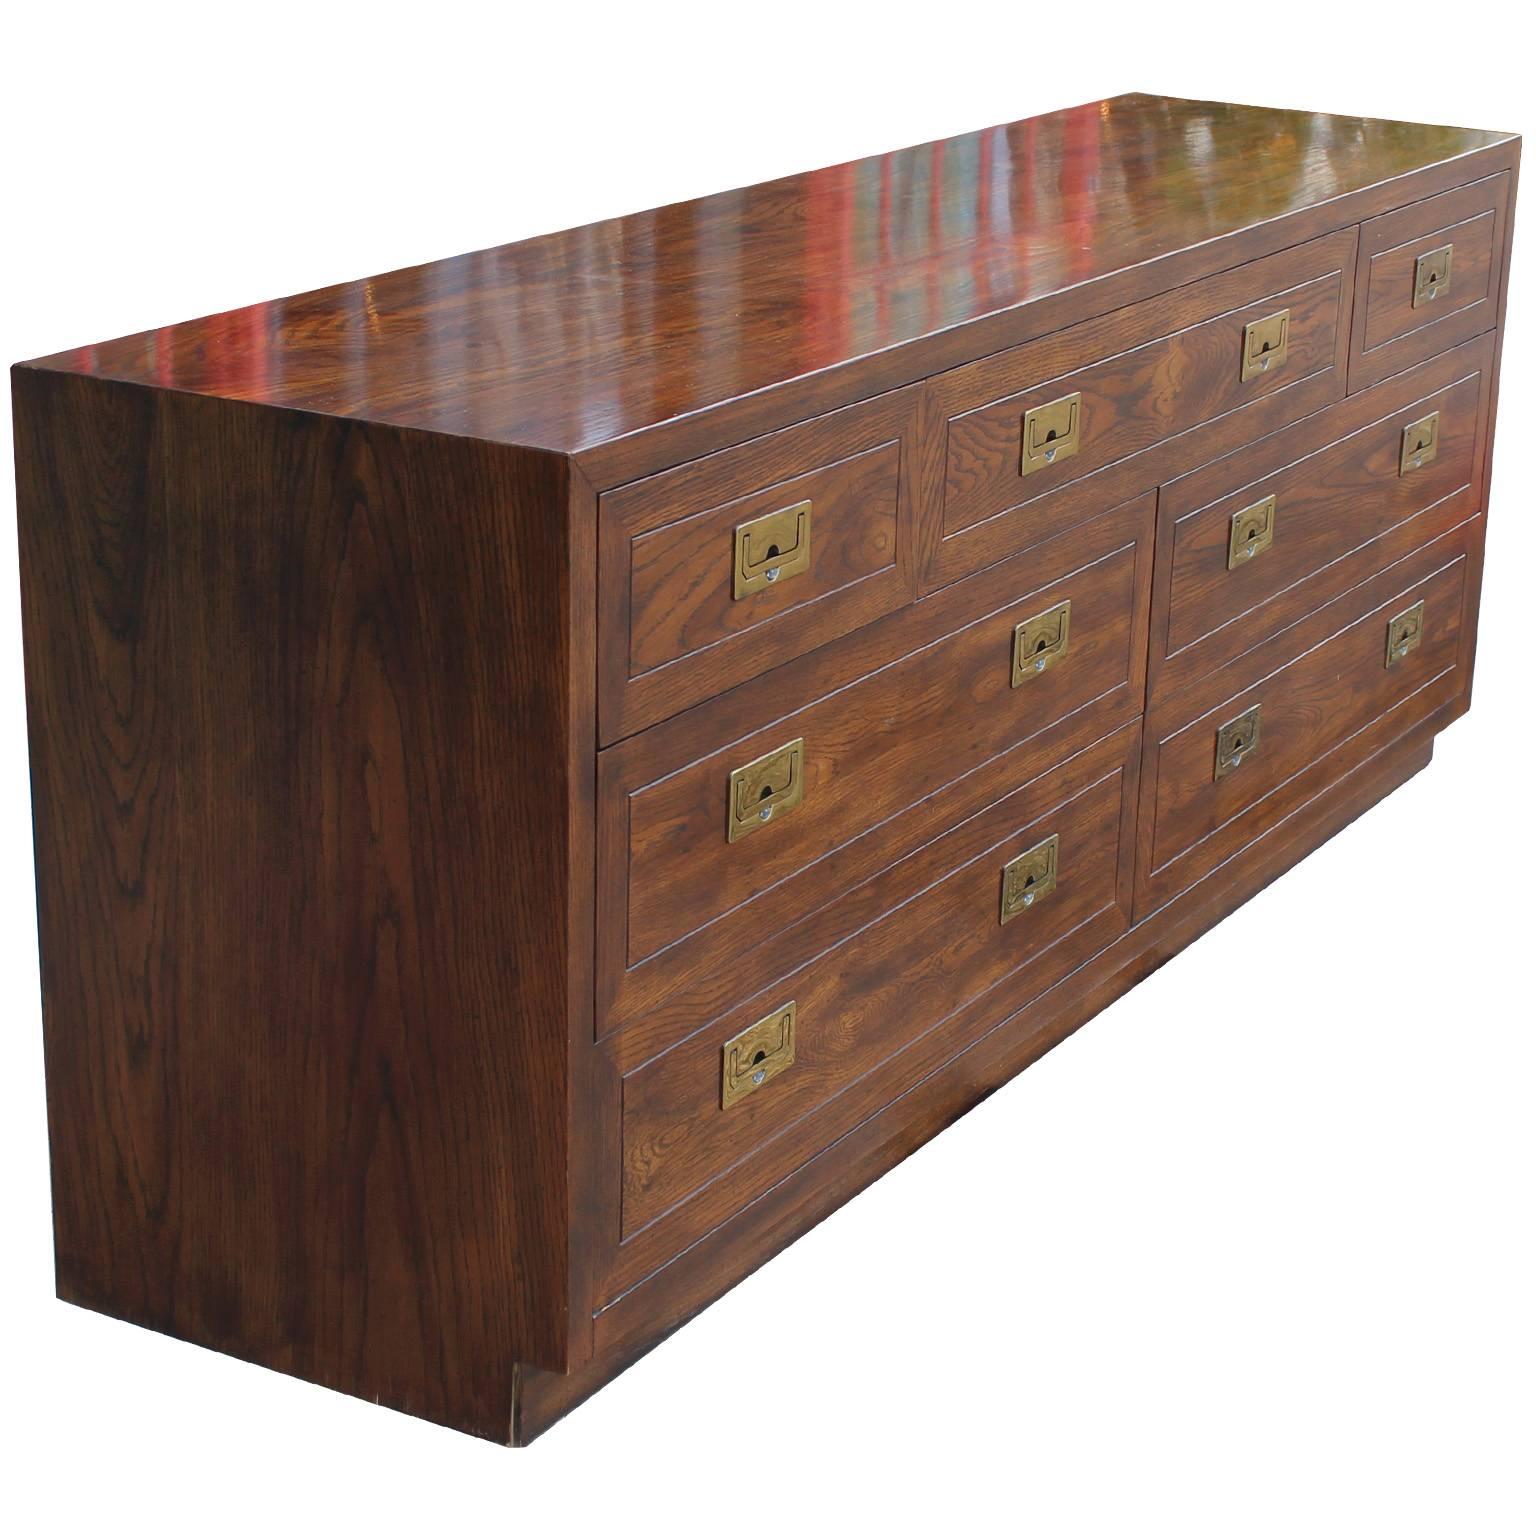 Wonderful Campaign style dresser. Dresser is of excellent craftsmanship and is constructed of a beautifully grained walnut. Seven drawers provide excellent storage. Shiny brass Campaign hardware finish the piece. Would be excellent in a Campaign,